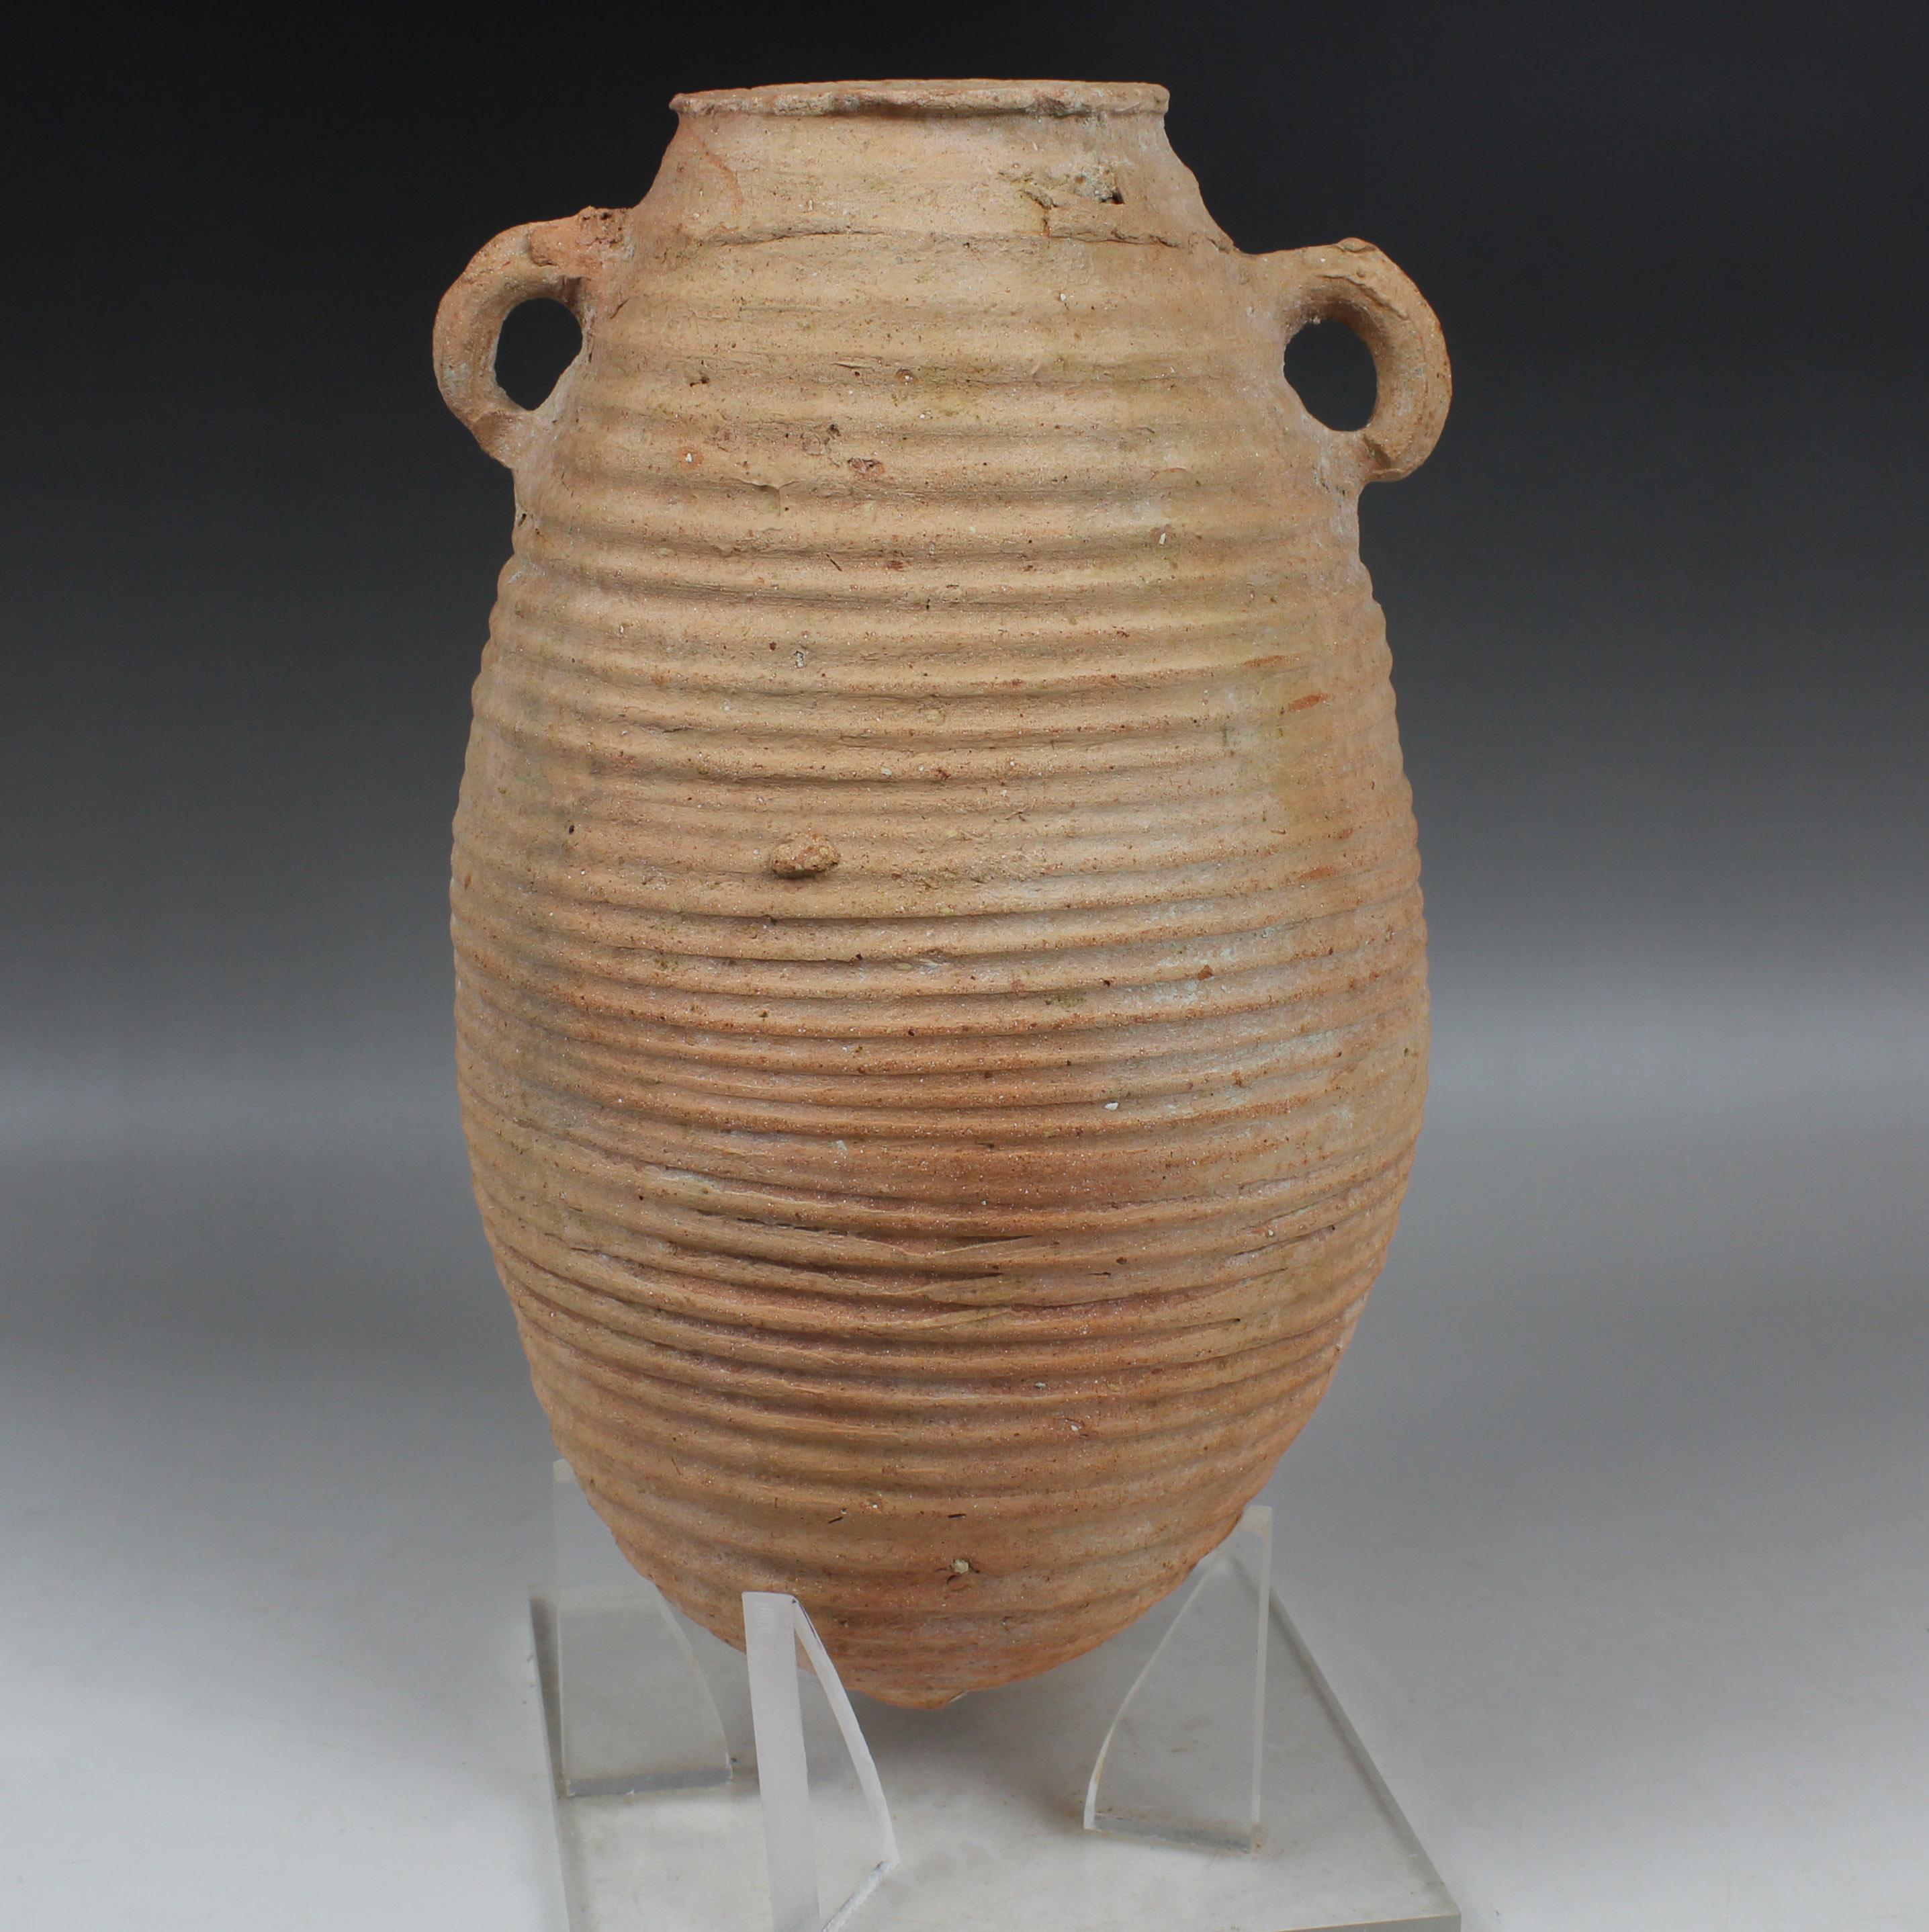 ITEM: Amphora, Type Proto-Gazan
MATERIAL: Pottery
CULTURE: Late Hellenistic / Early Roman
PERIOD: 1st Century B.C – 1st Century A.D
DIMENSIONS: 290 mm x 165 mm (without stand)
CONDITION: Good condition. Includes stand
PROVENANCE: Ex Emeritus